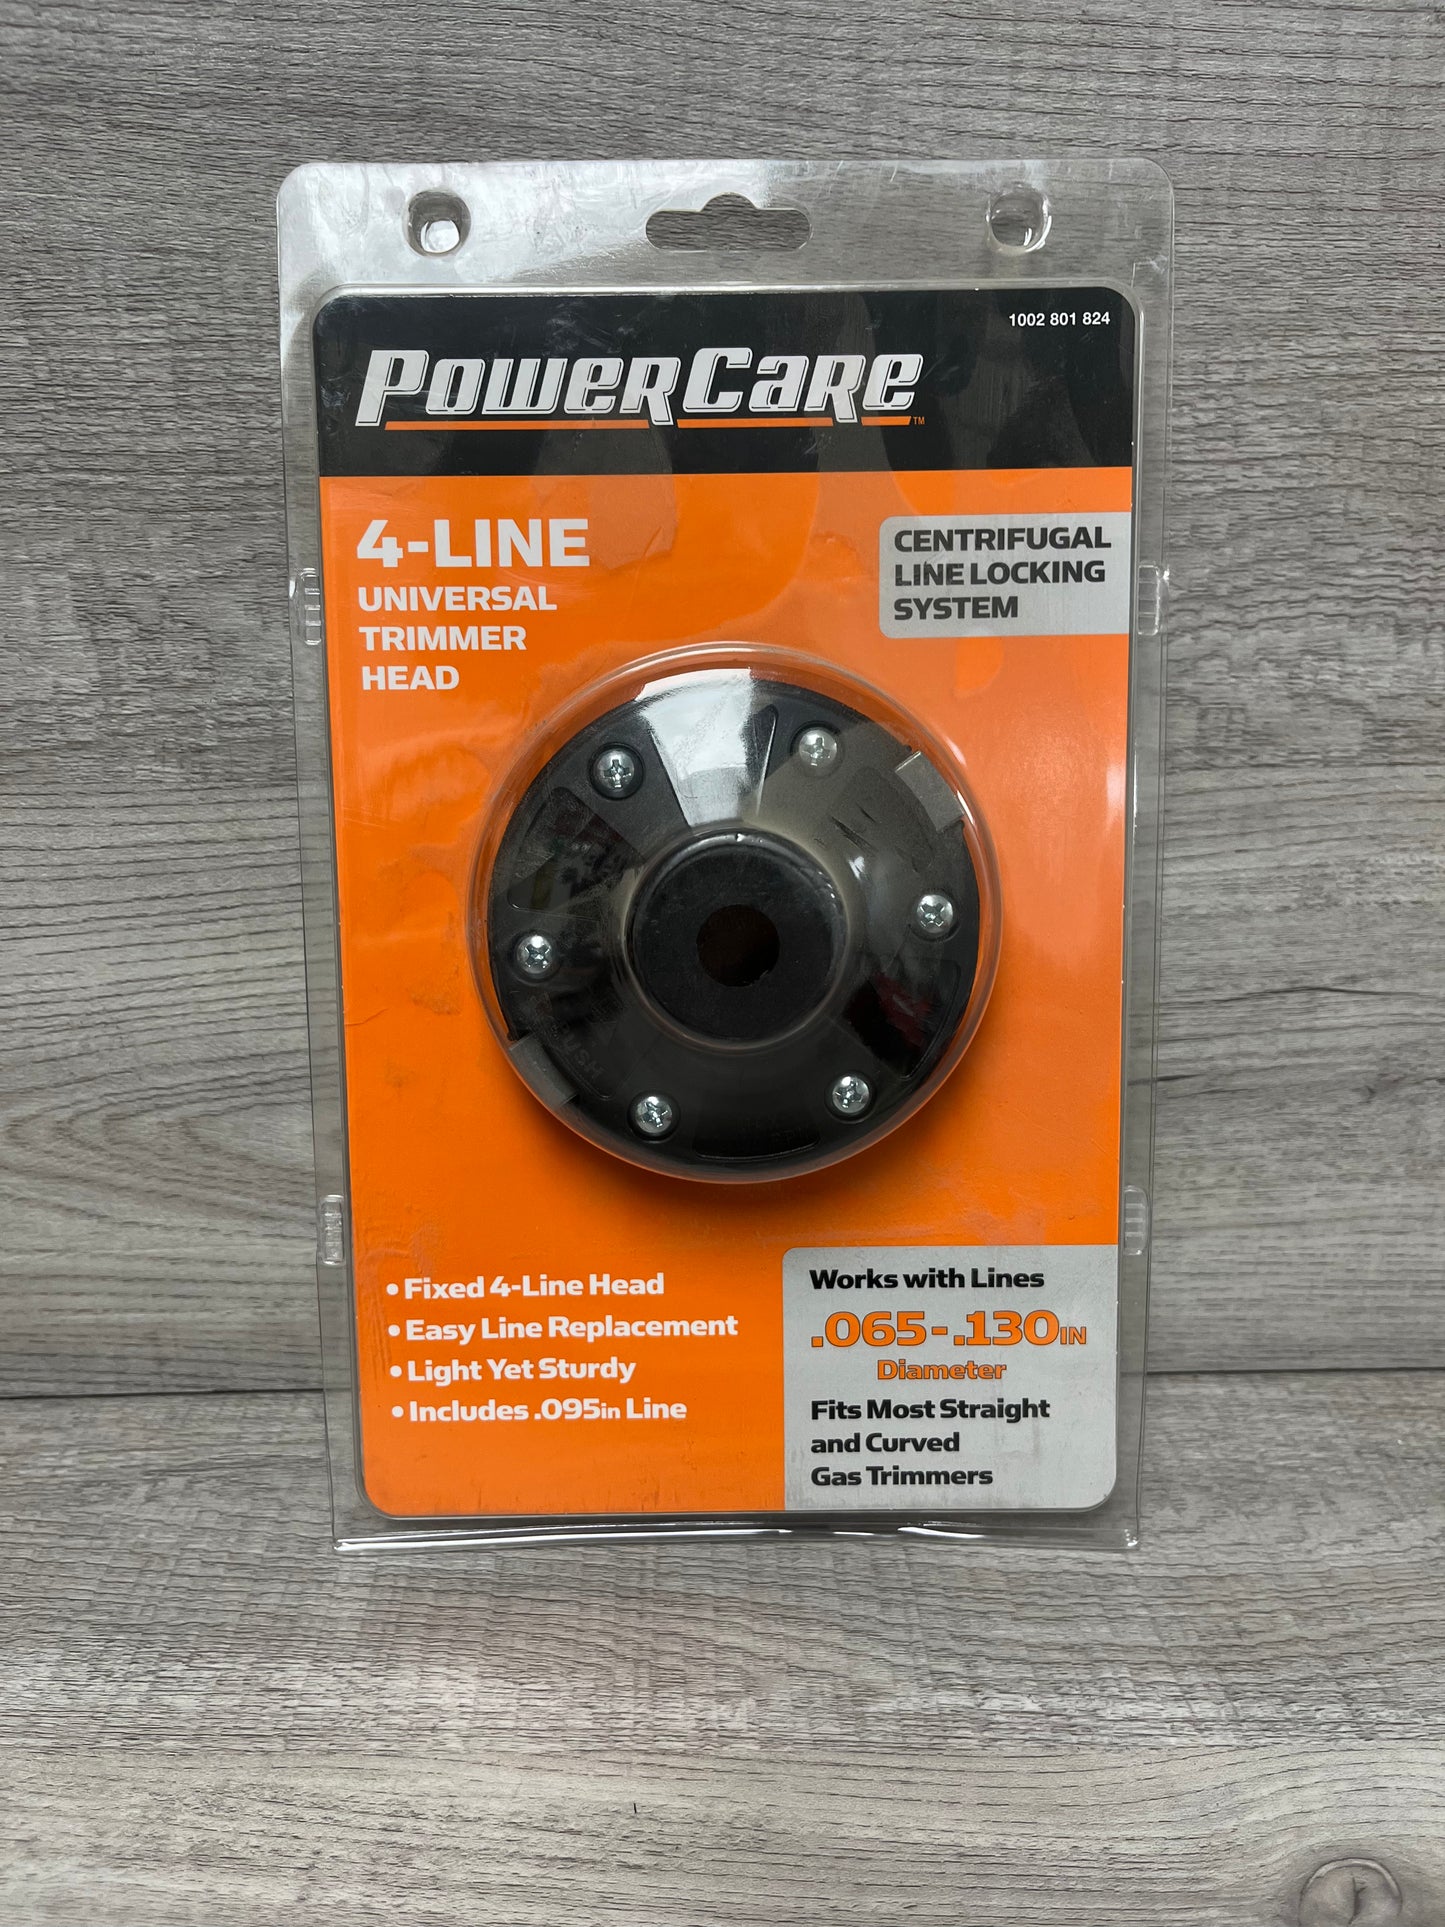 PowerCare 4-Line Universal Trimmer Head Centrifugal Line Locking System